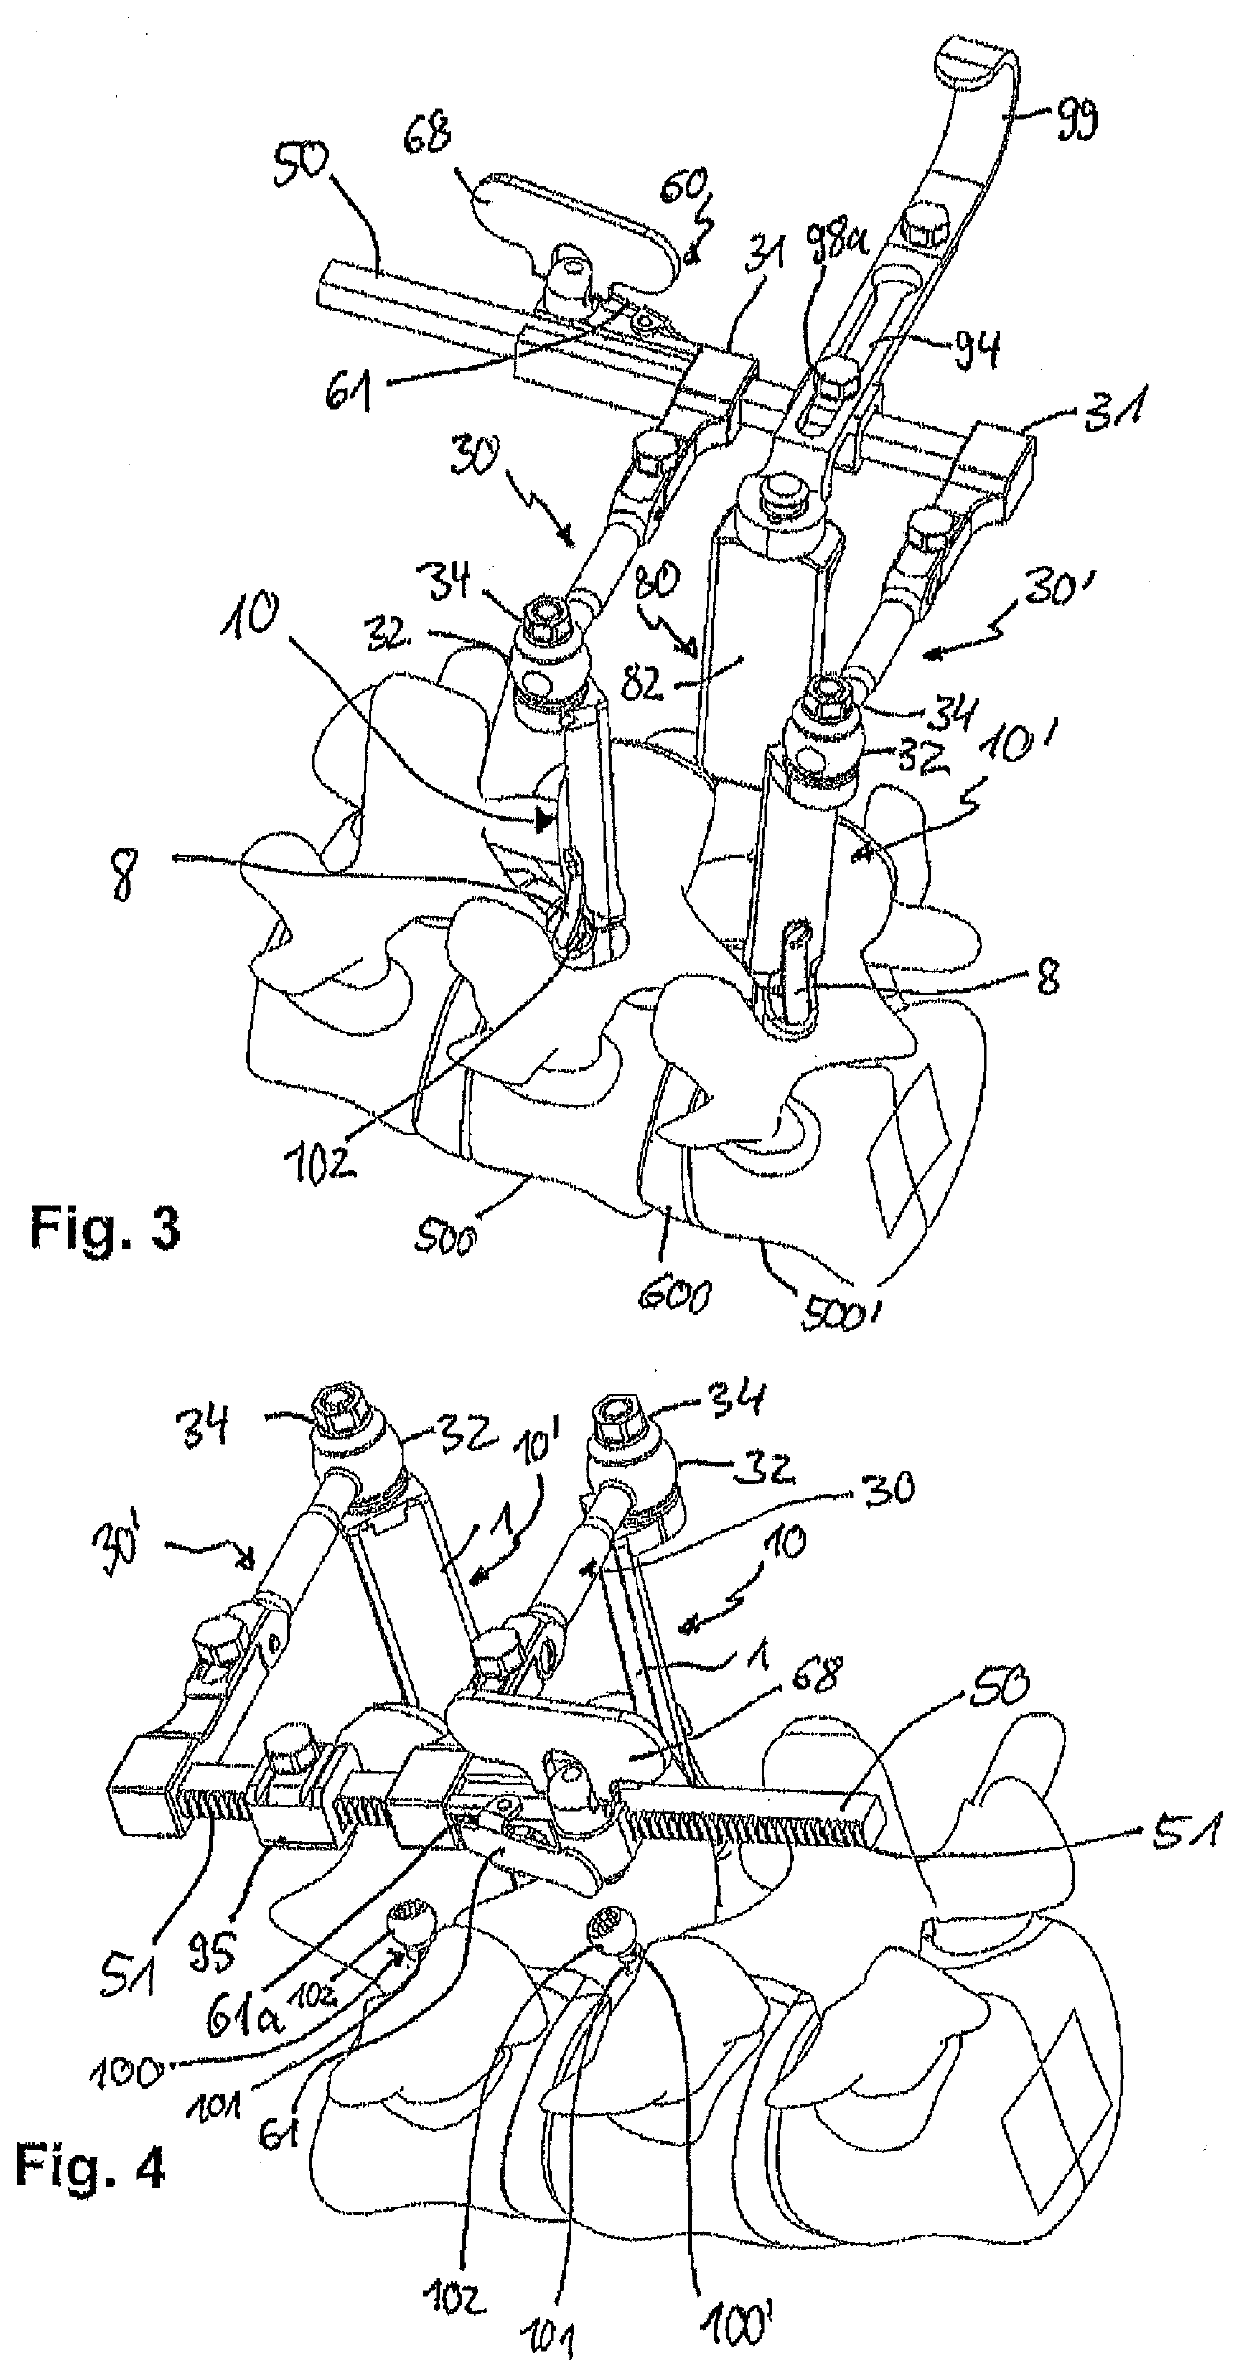 Instrument for attaching to a bone anchor and instrument for use in distraction and/or retraction, in particular for orthopedic surgery or neurosurgery, more specifically for spinal surgery